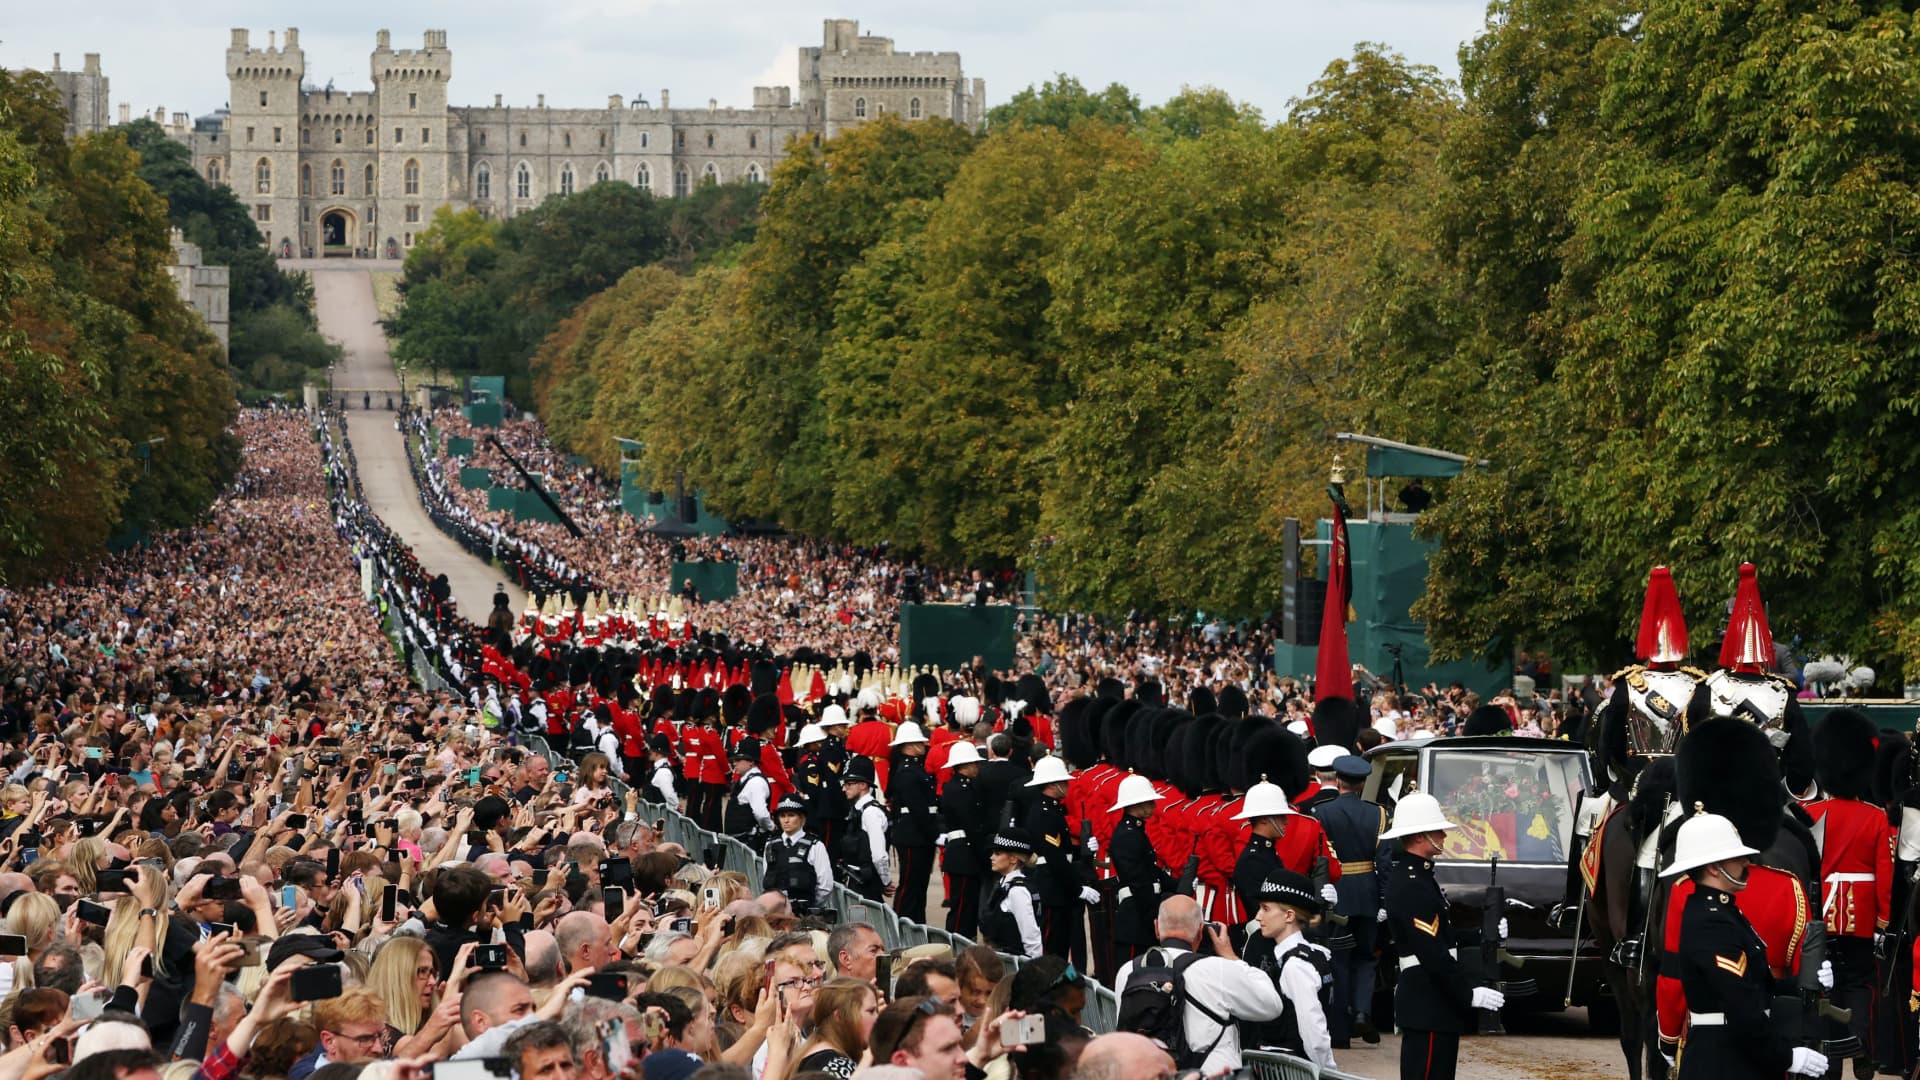 The hearse carrying the coffin of Britain's Queen Elizabeth is escorted along the Long Walk towards Windsor castle in the funeral procession, on the day of the state funeral and burial of Britain's Queen Elizabeth, in Windsor, Britain, September 19, 2022